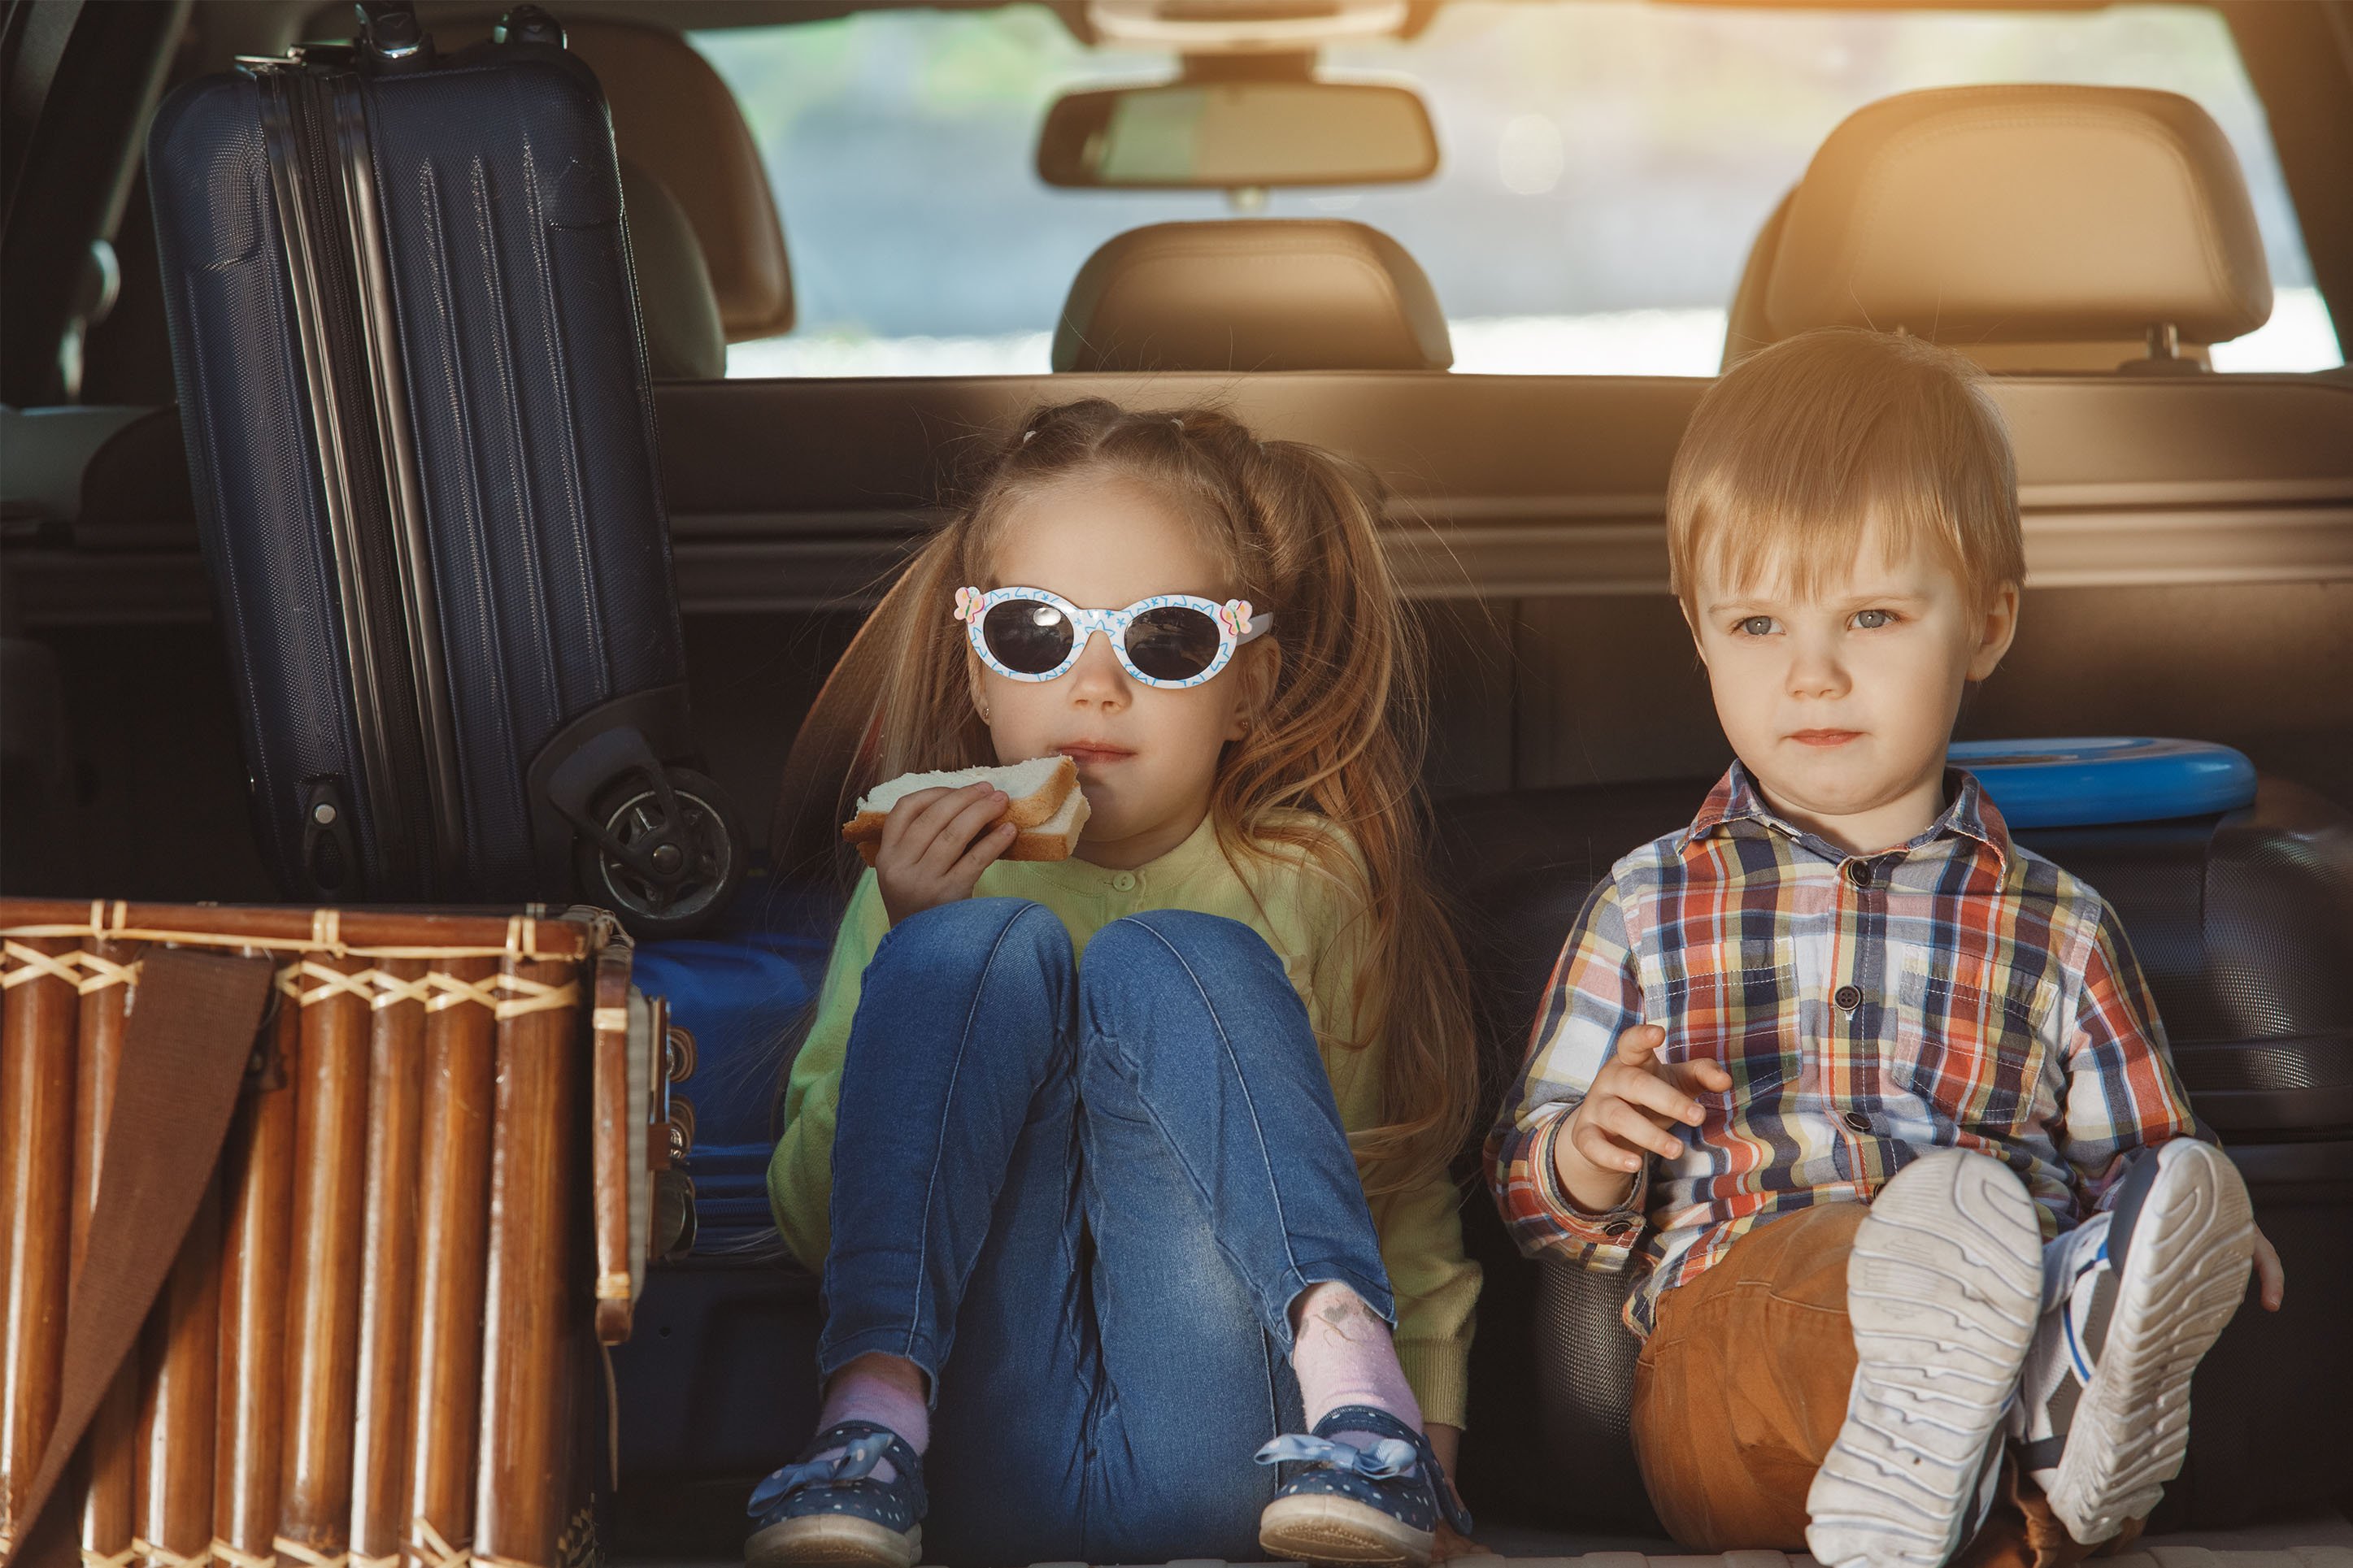 Kids eating snacks in the back of the car. 